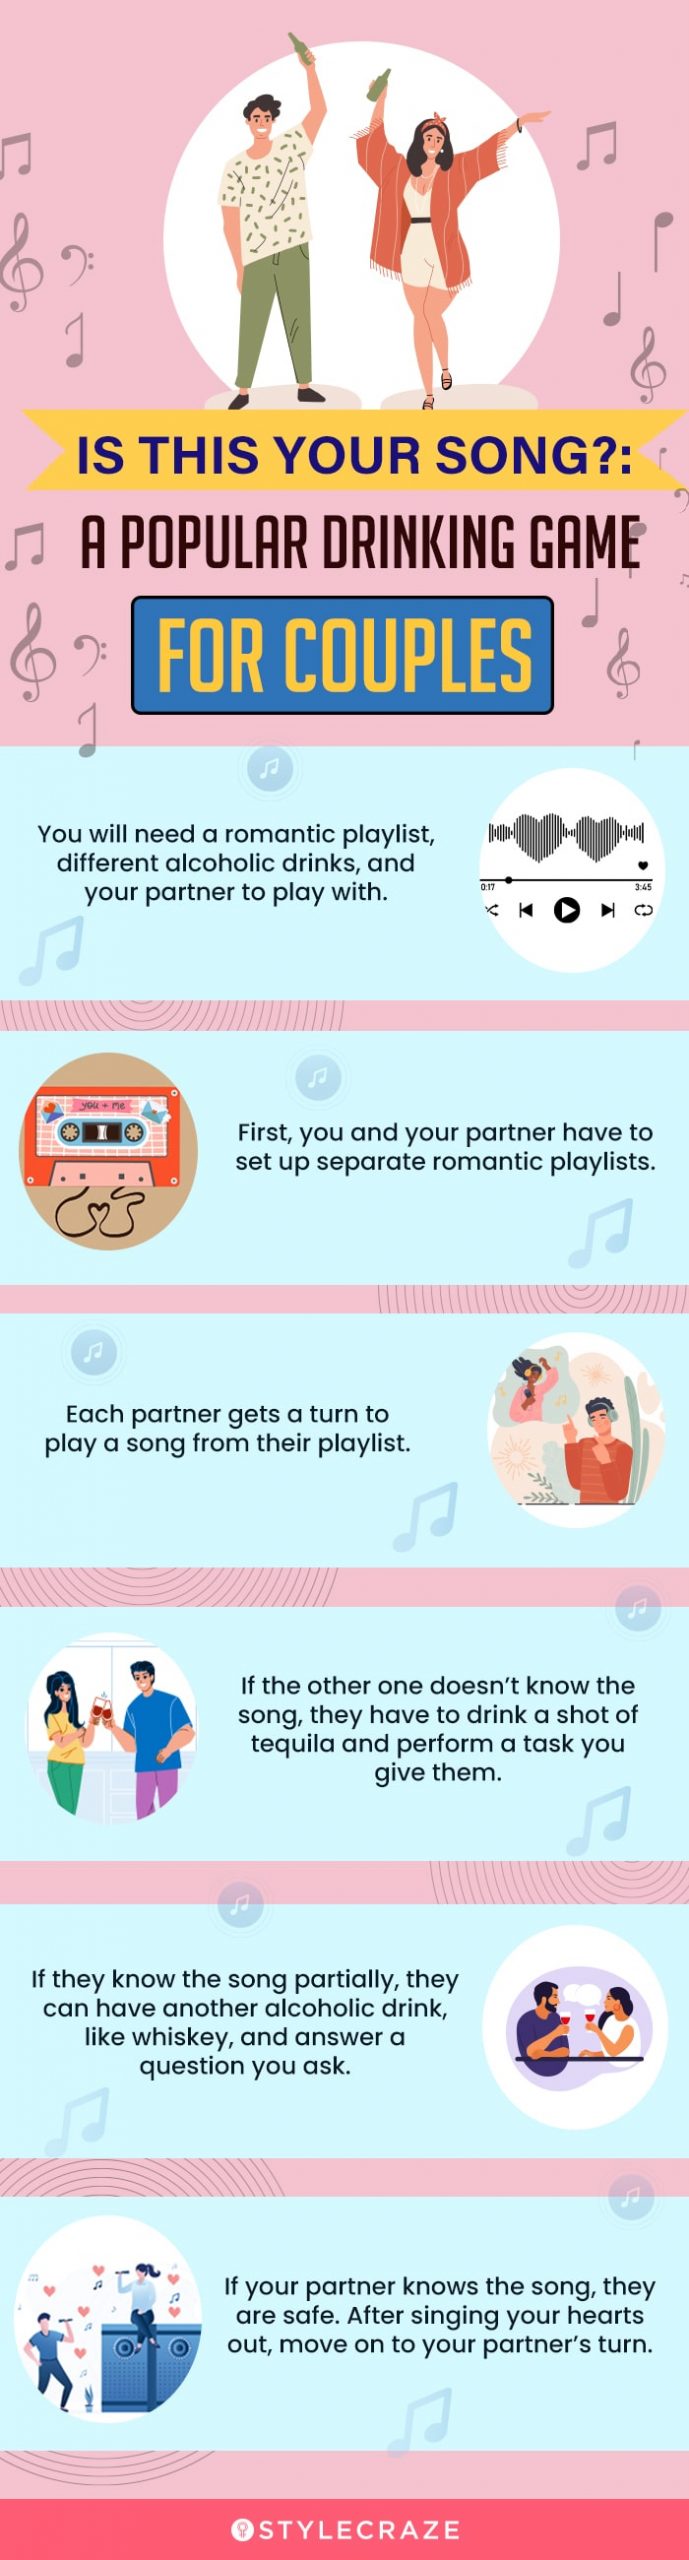 is this your song drinking game for couples [infographic]